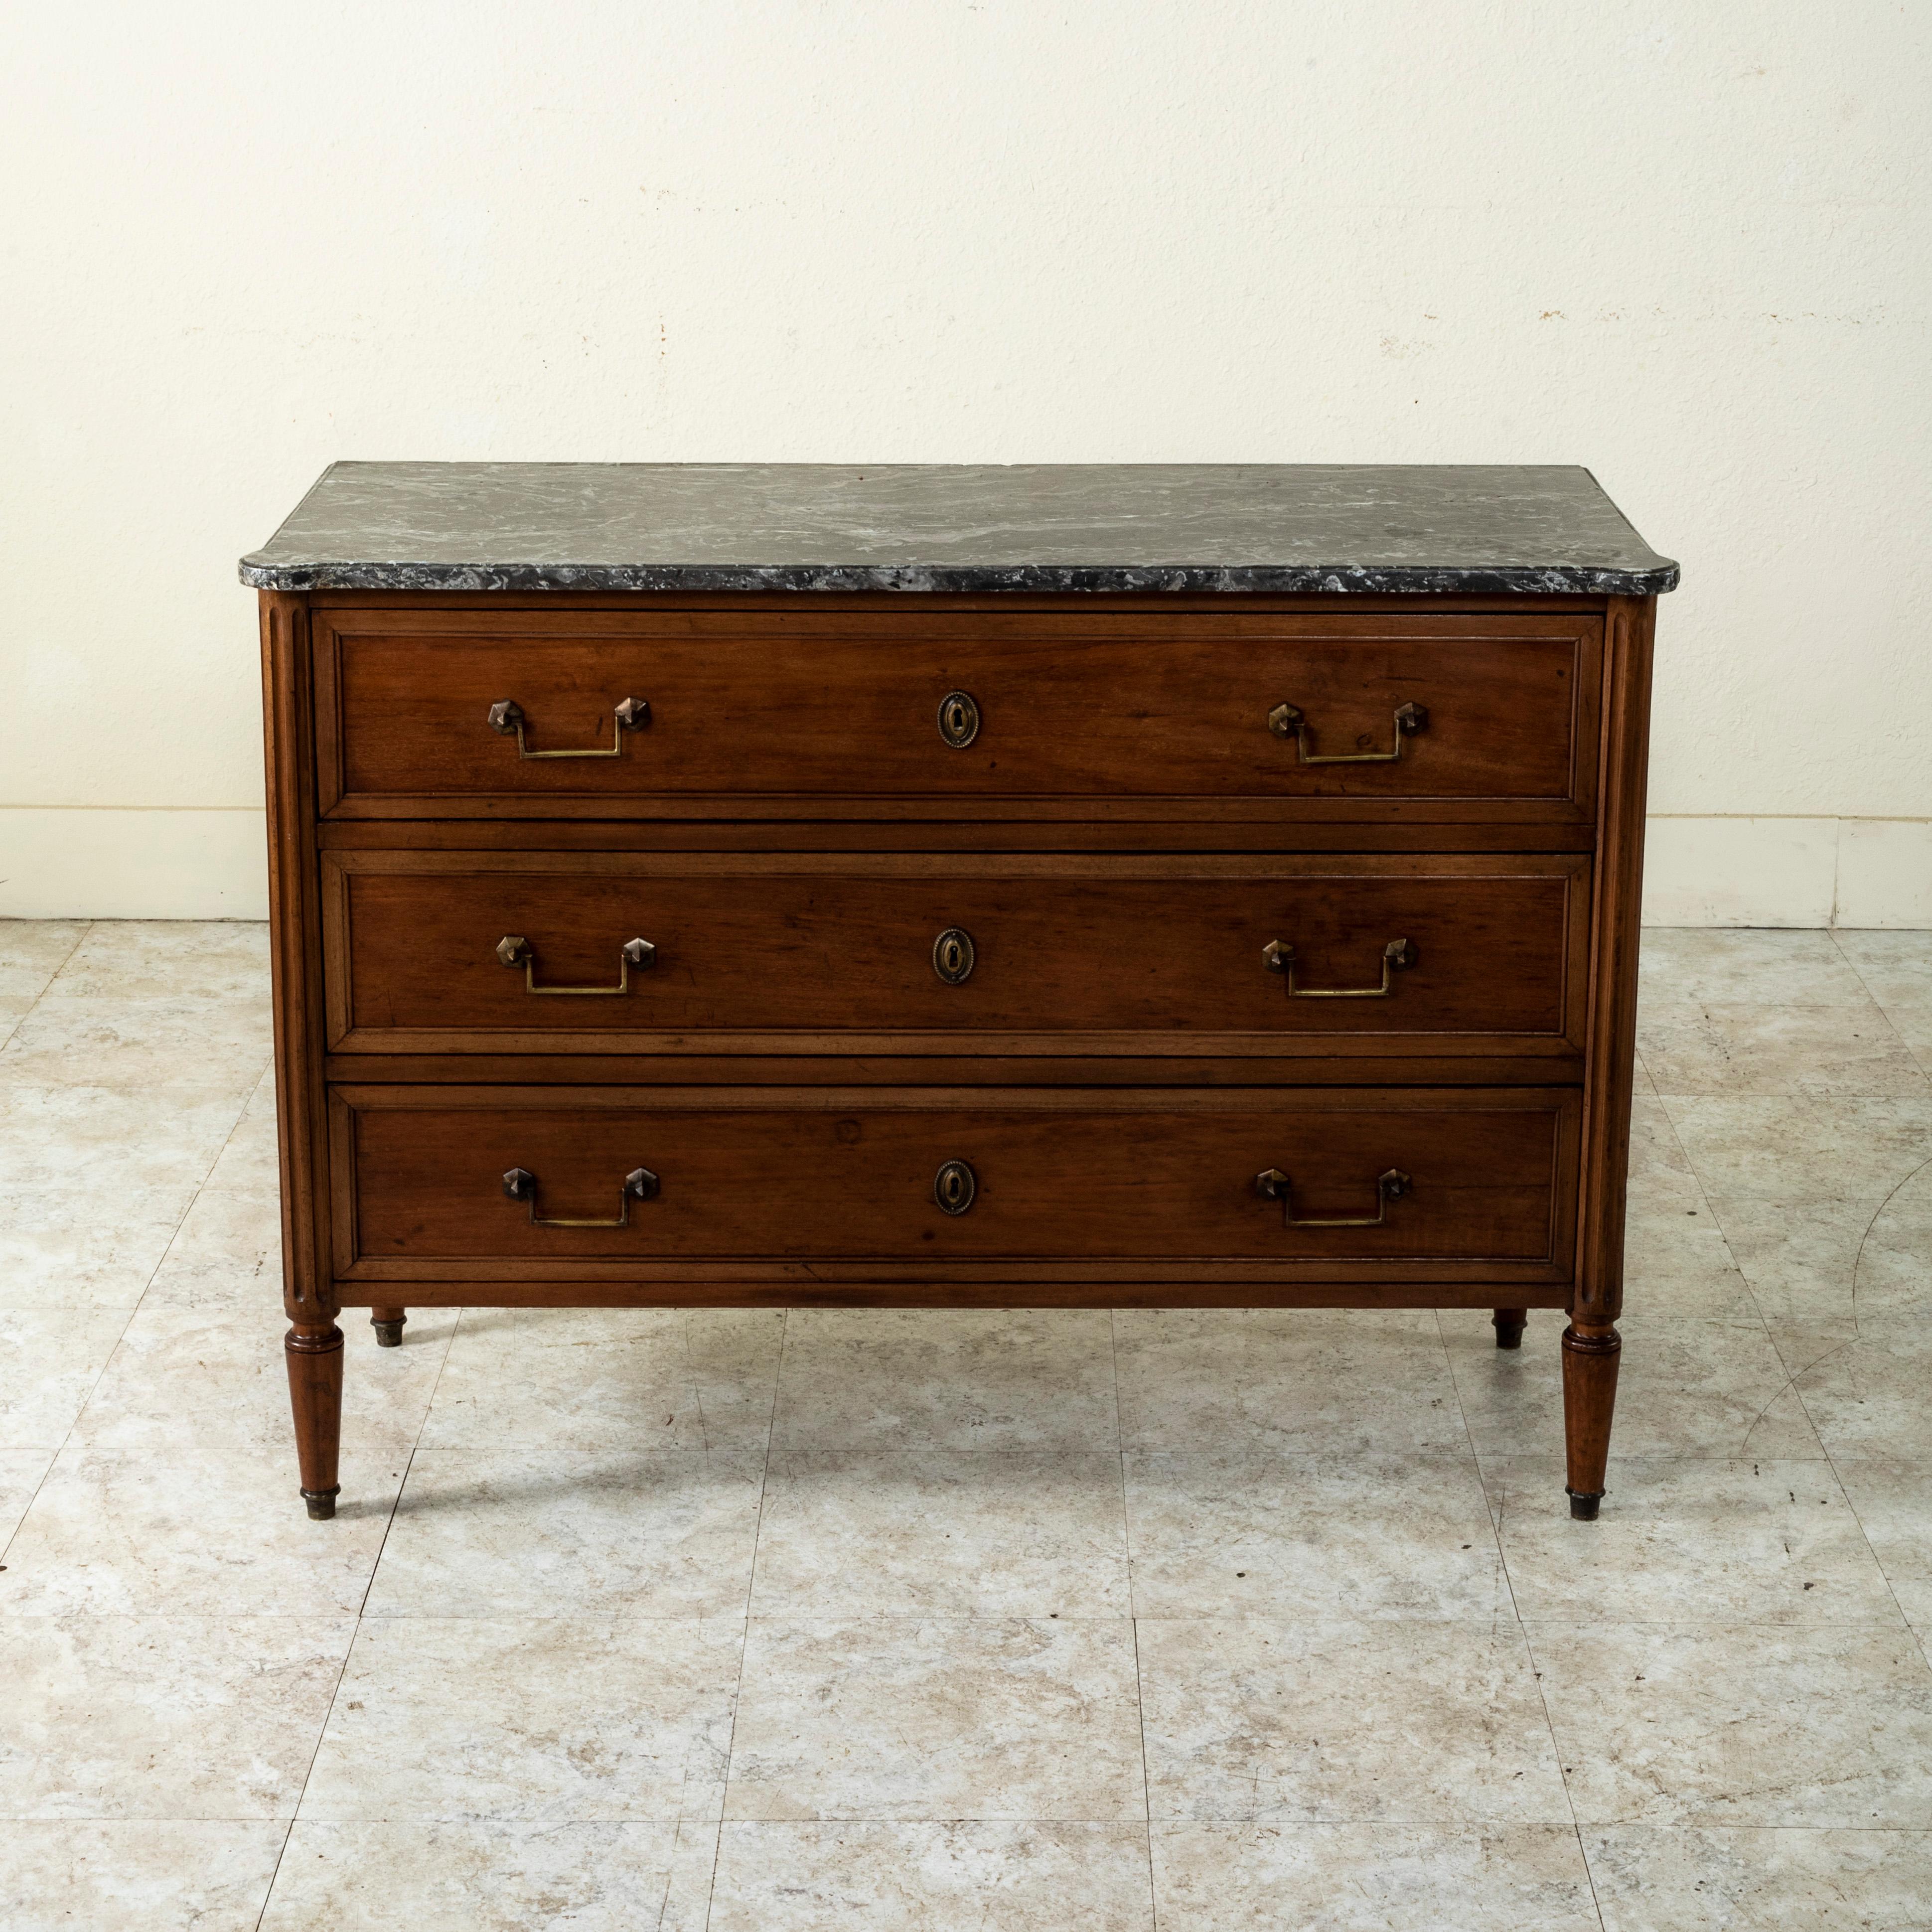 This early twentieth century French Louis XVI style mahogany commode or chest of drawers features a beveled Saint Anne marble top and fluted corners. Its three drawers of dovetail construction are fitted with classic beaded escutcheons and squared